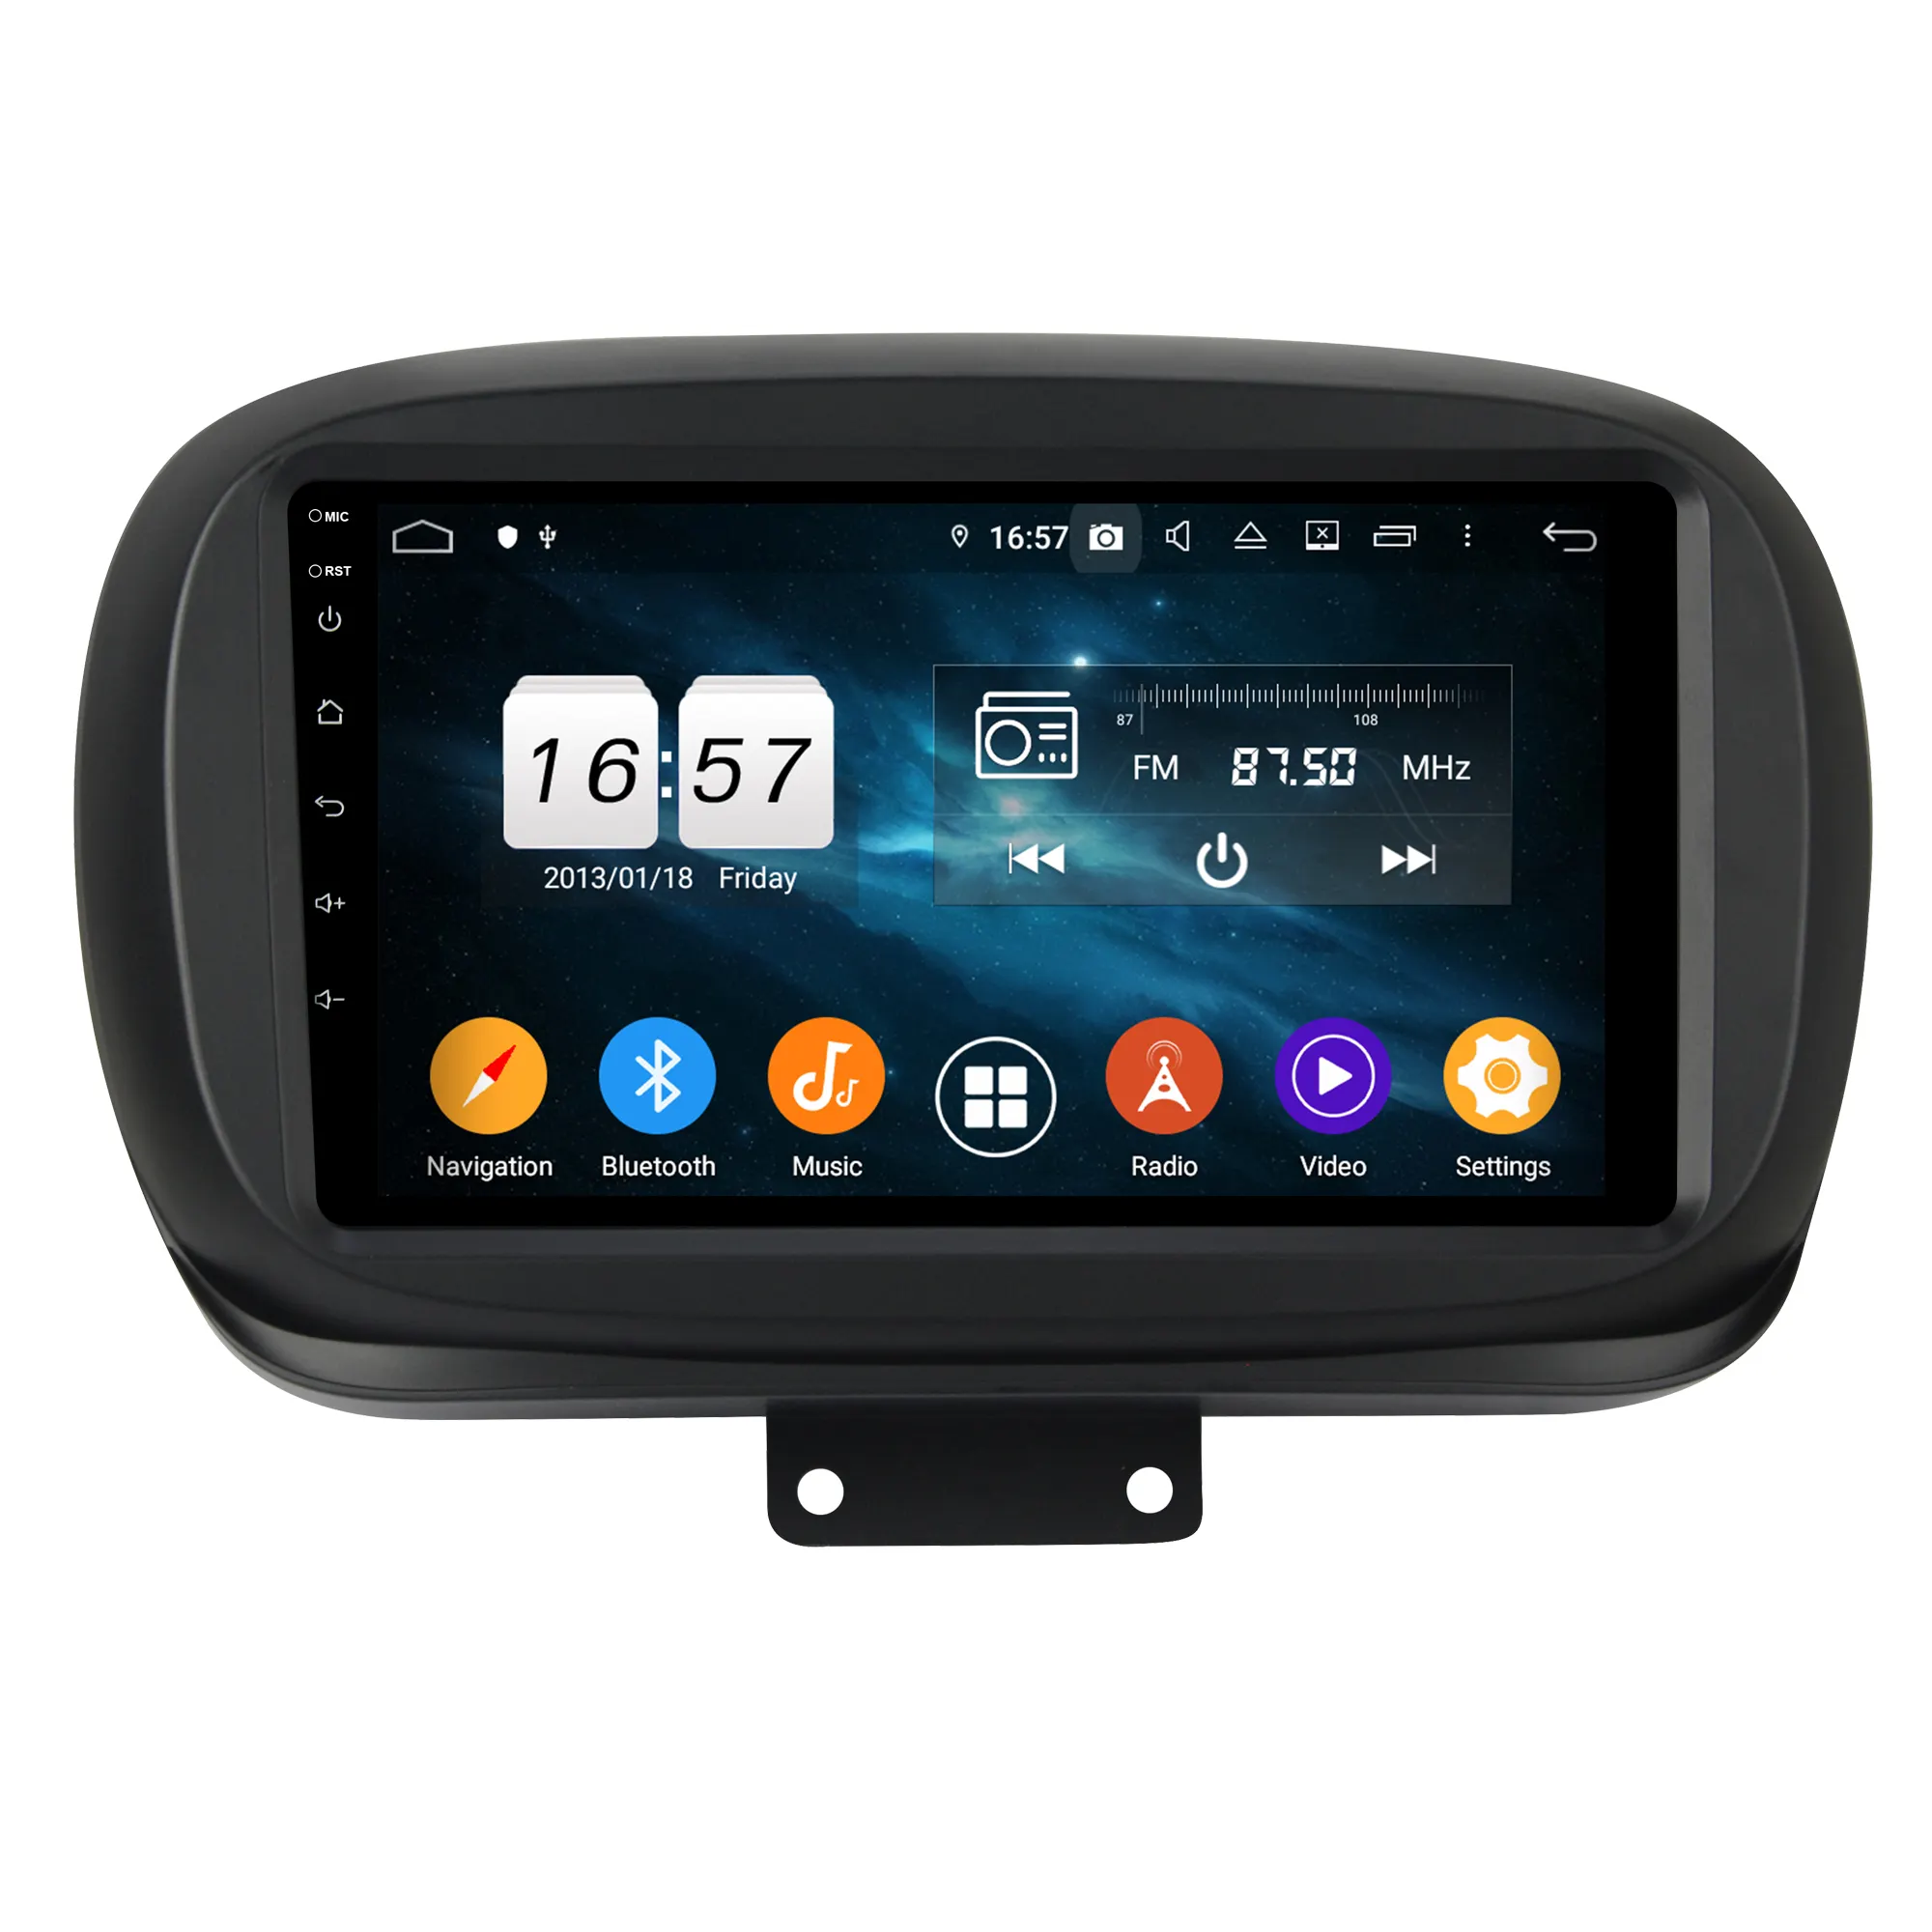 KD-9060 hot sell Android 9.0 car radio capacitive multi-touch screen car dvd player car dsp audio for Fiat 500X 2014-2019